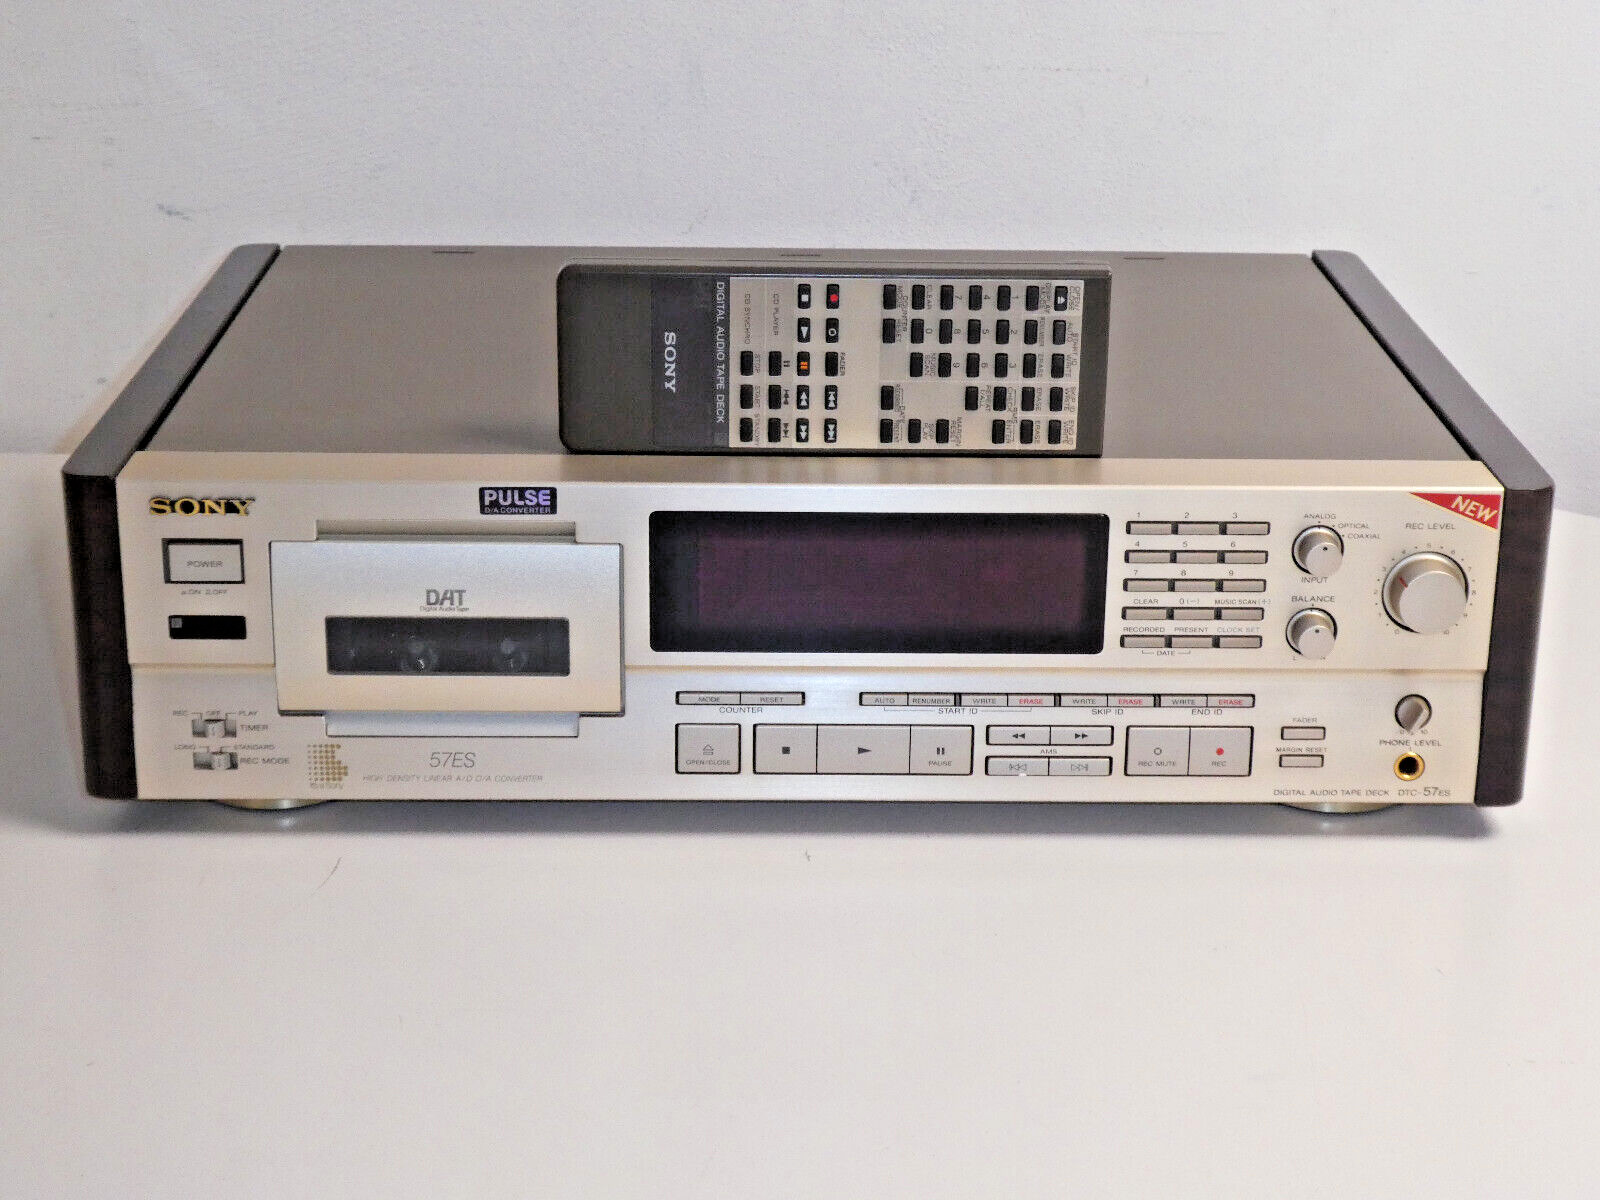 Sony DTC-57ES High-End DAT-Recorder Champagner, inkl. FB, 2 Jahre Garantie